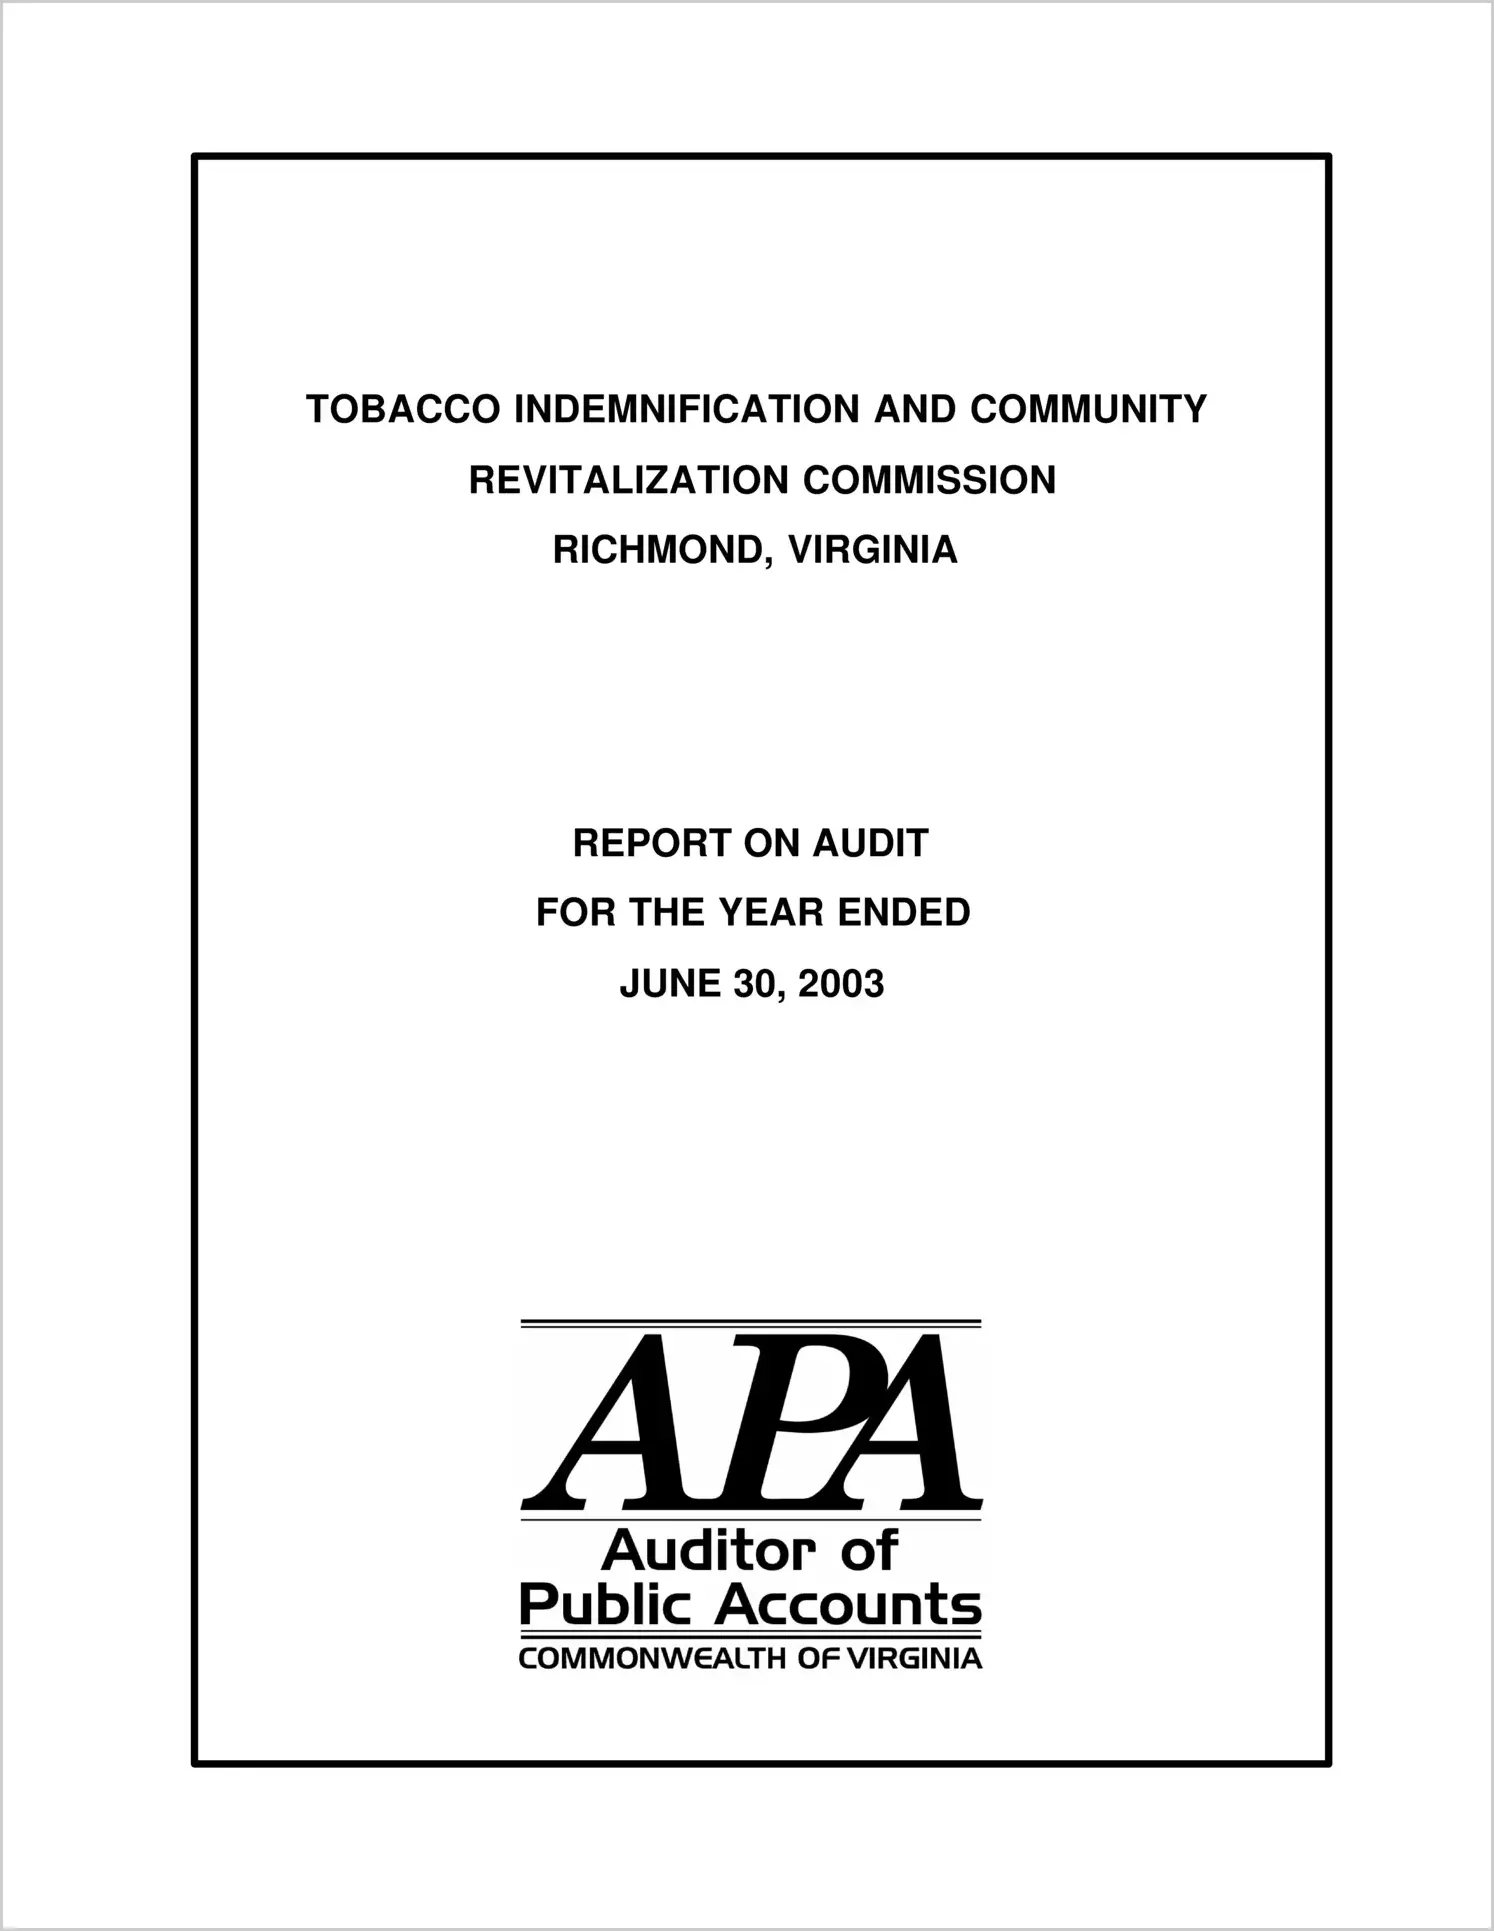 Tobacco Indemnification and Community Revitalization Commission for the year ended June 30, 2003